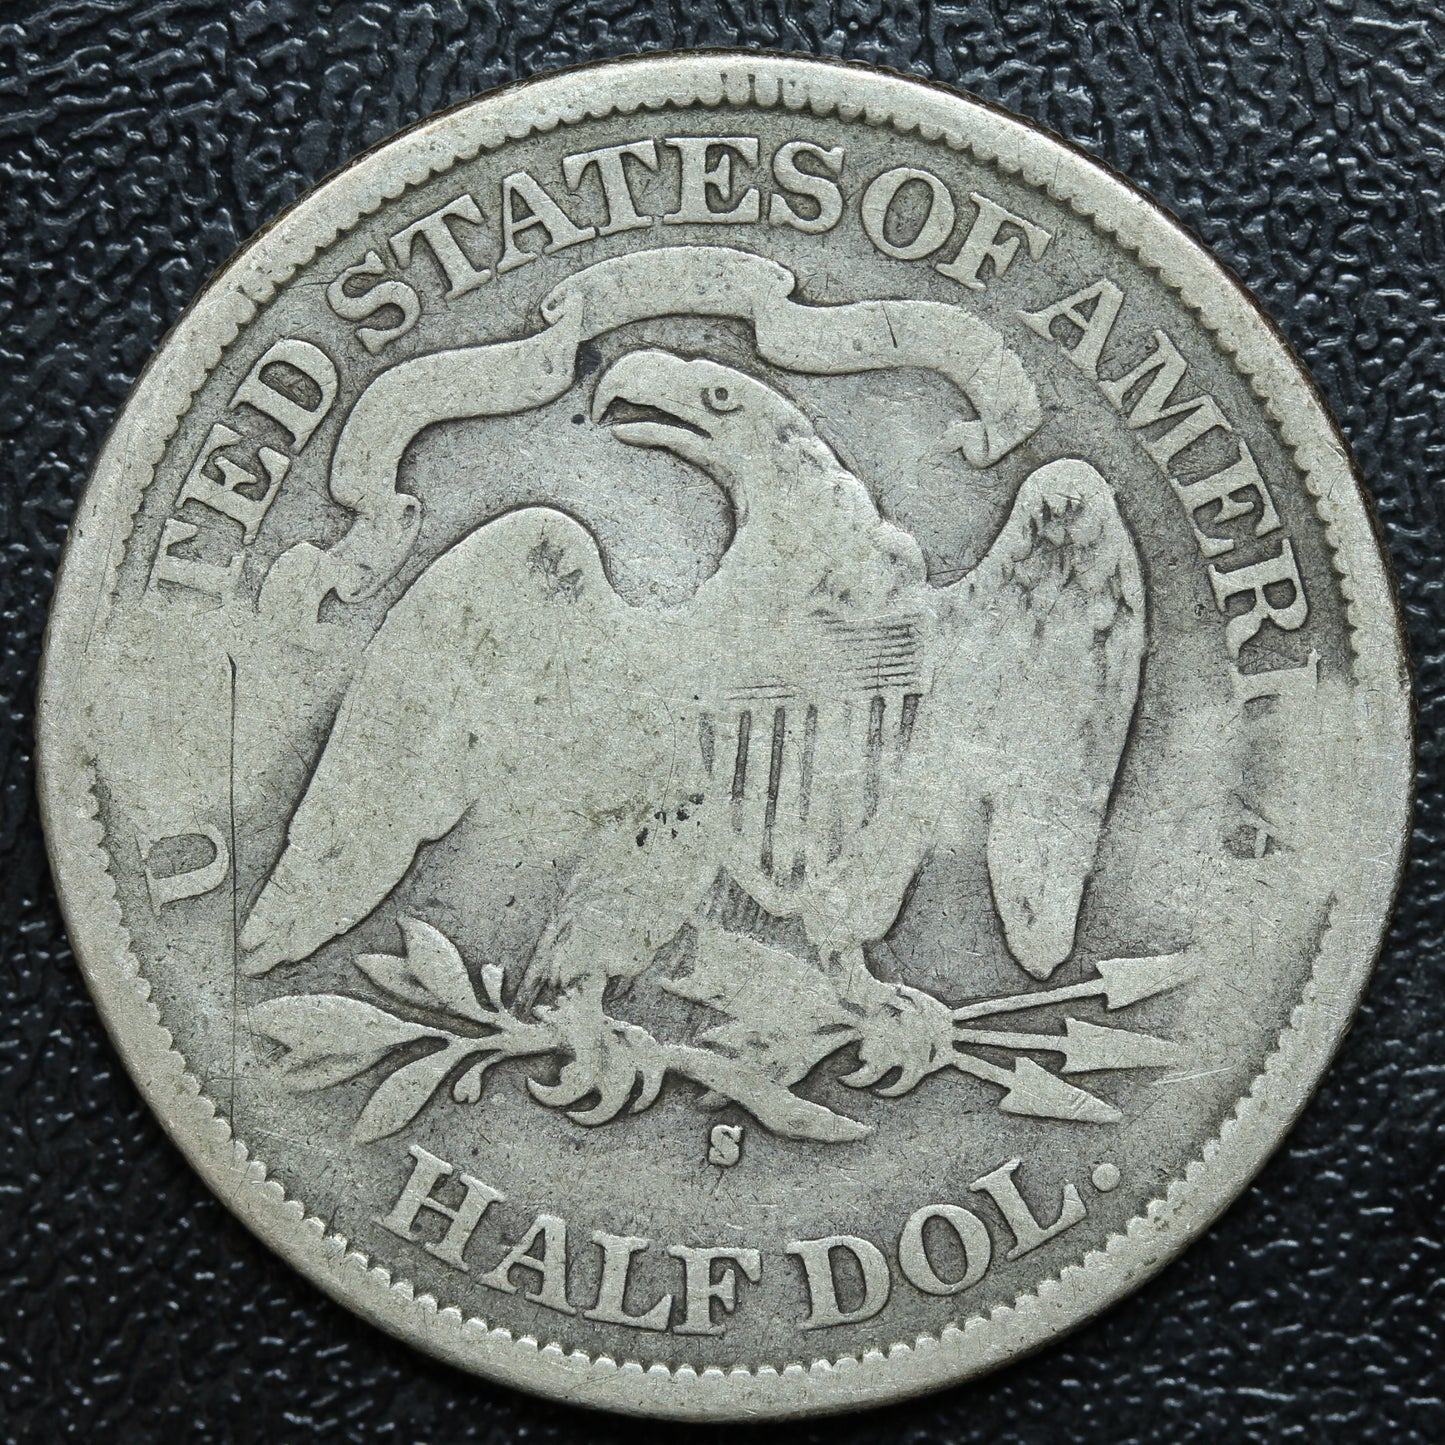 1875 S  Seated Liberty Silver Half Dollar "Robie" Stamp